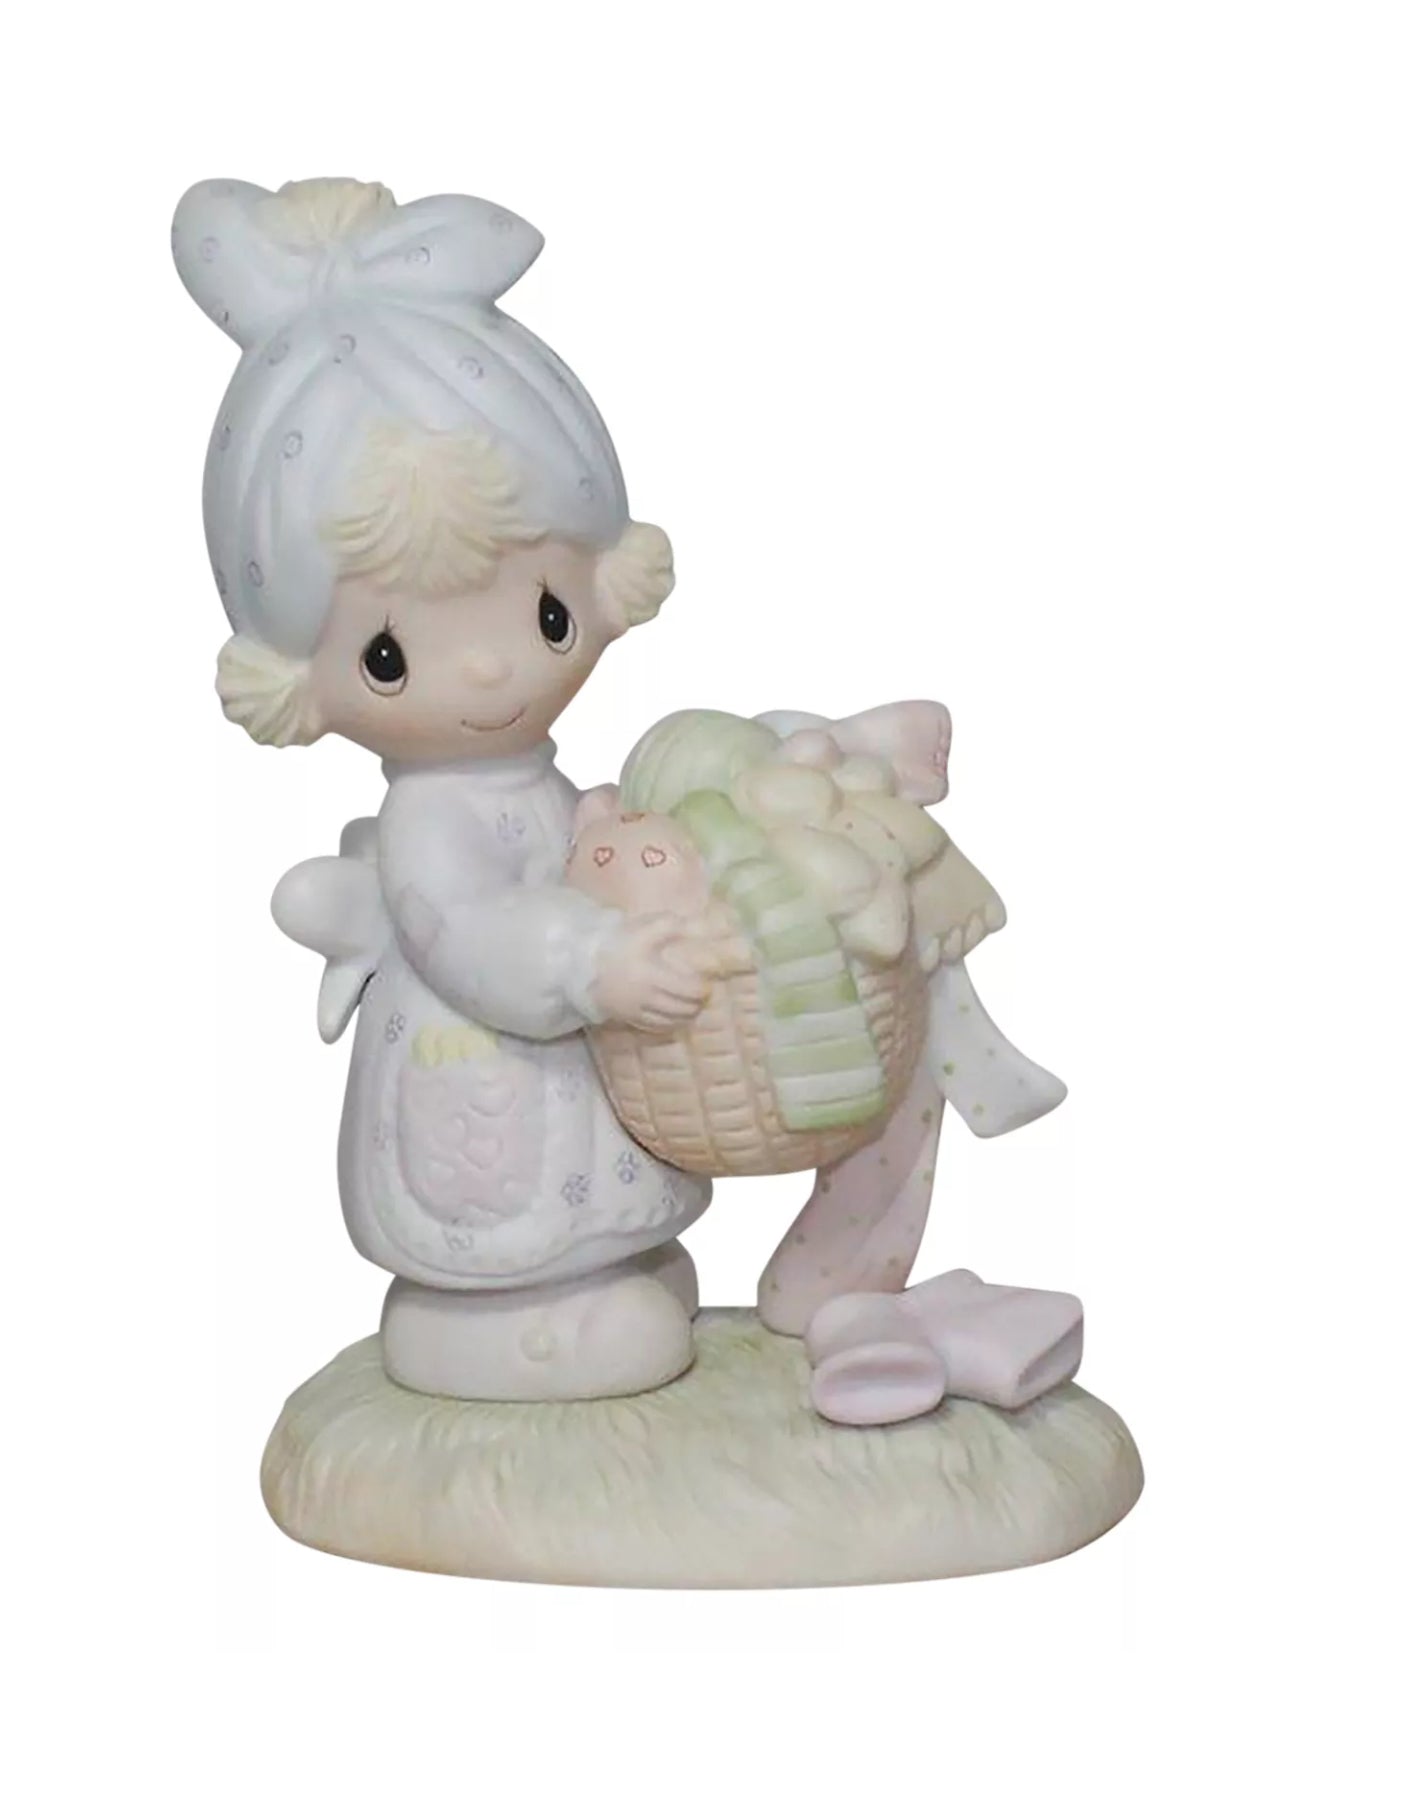 Be Not Weary In Well Doing - Precious Moment Figurine